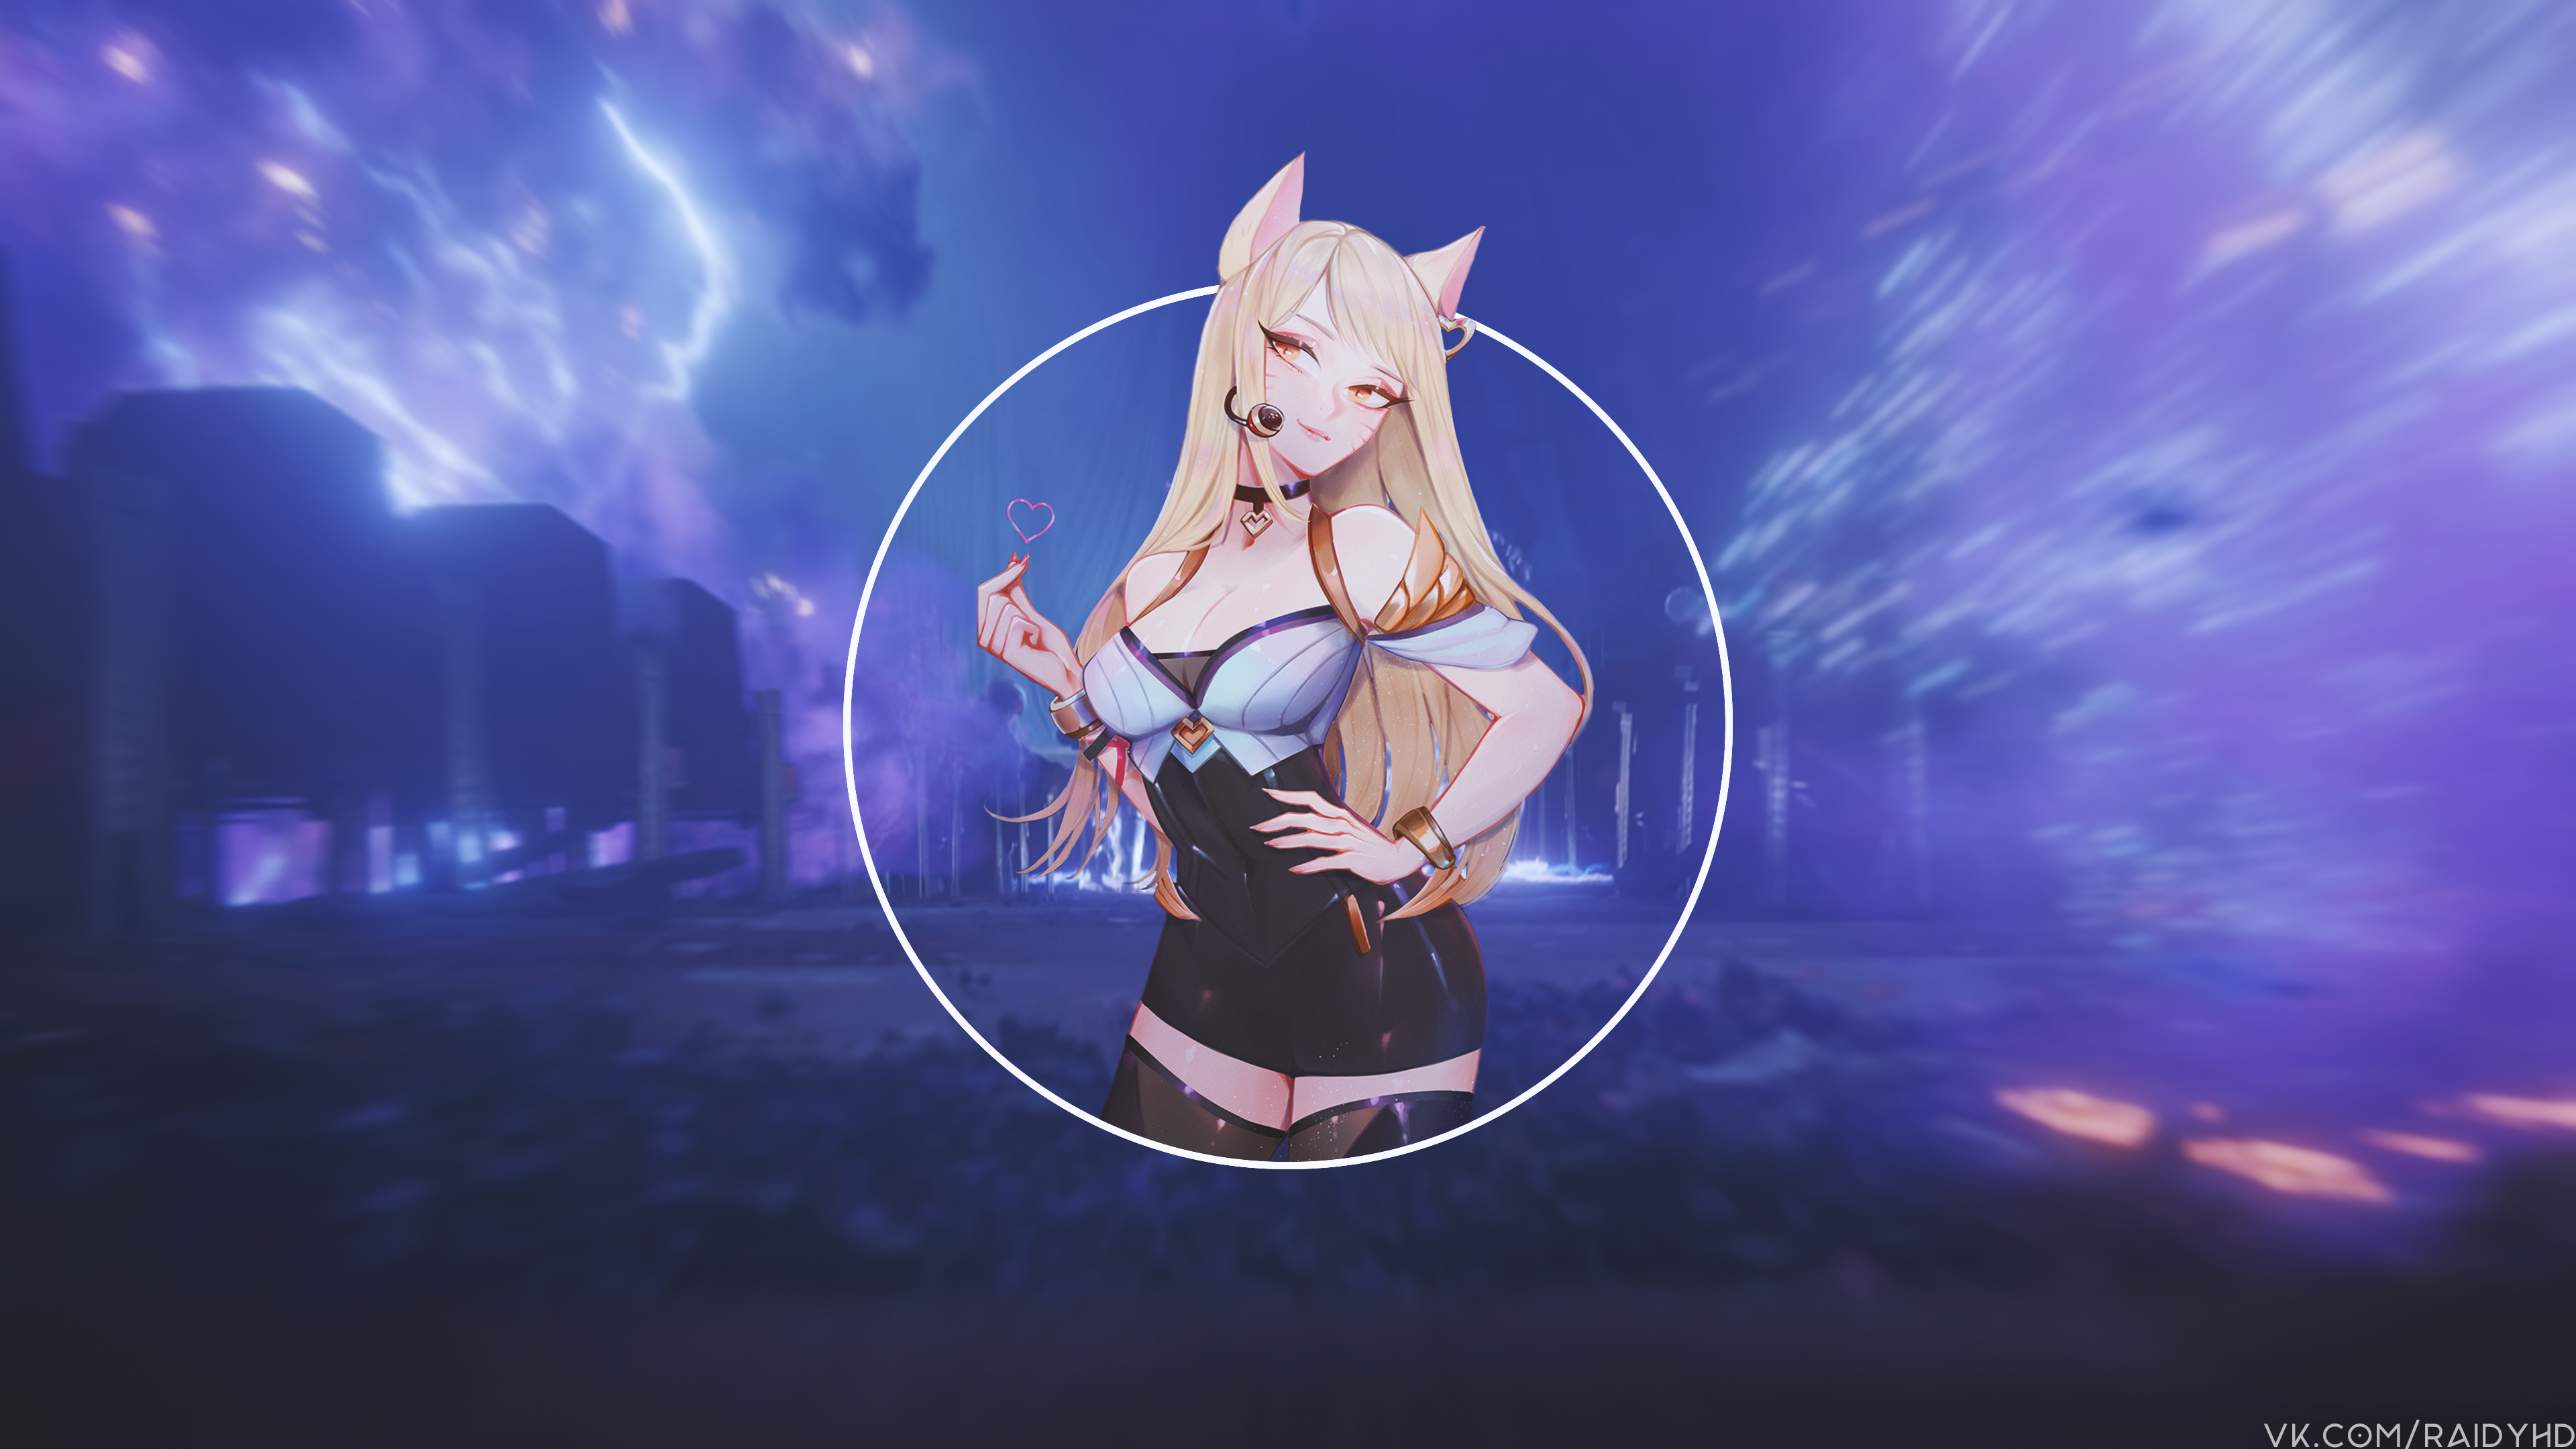 Anime 3840x2160 anime girls picture-in-picture anime League of Legends Ahri (League of Legends) K/DA